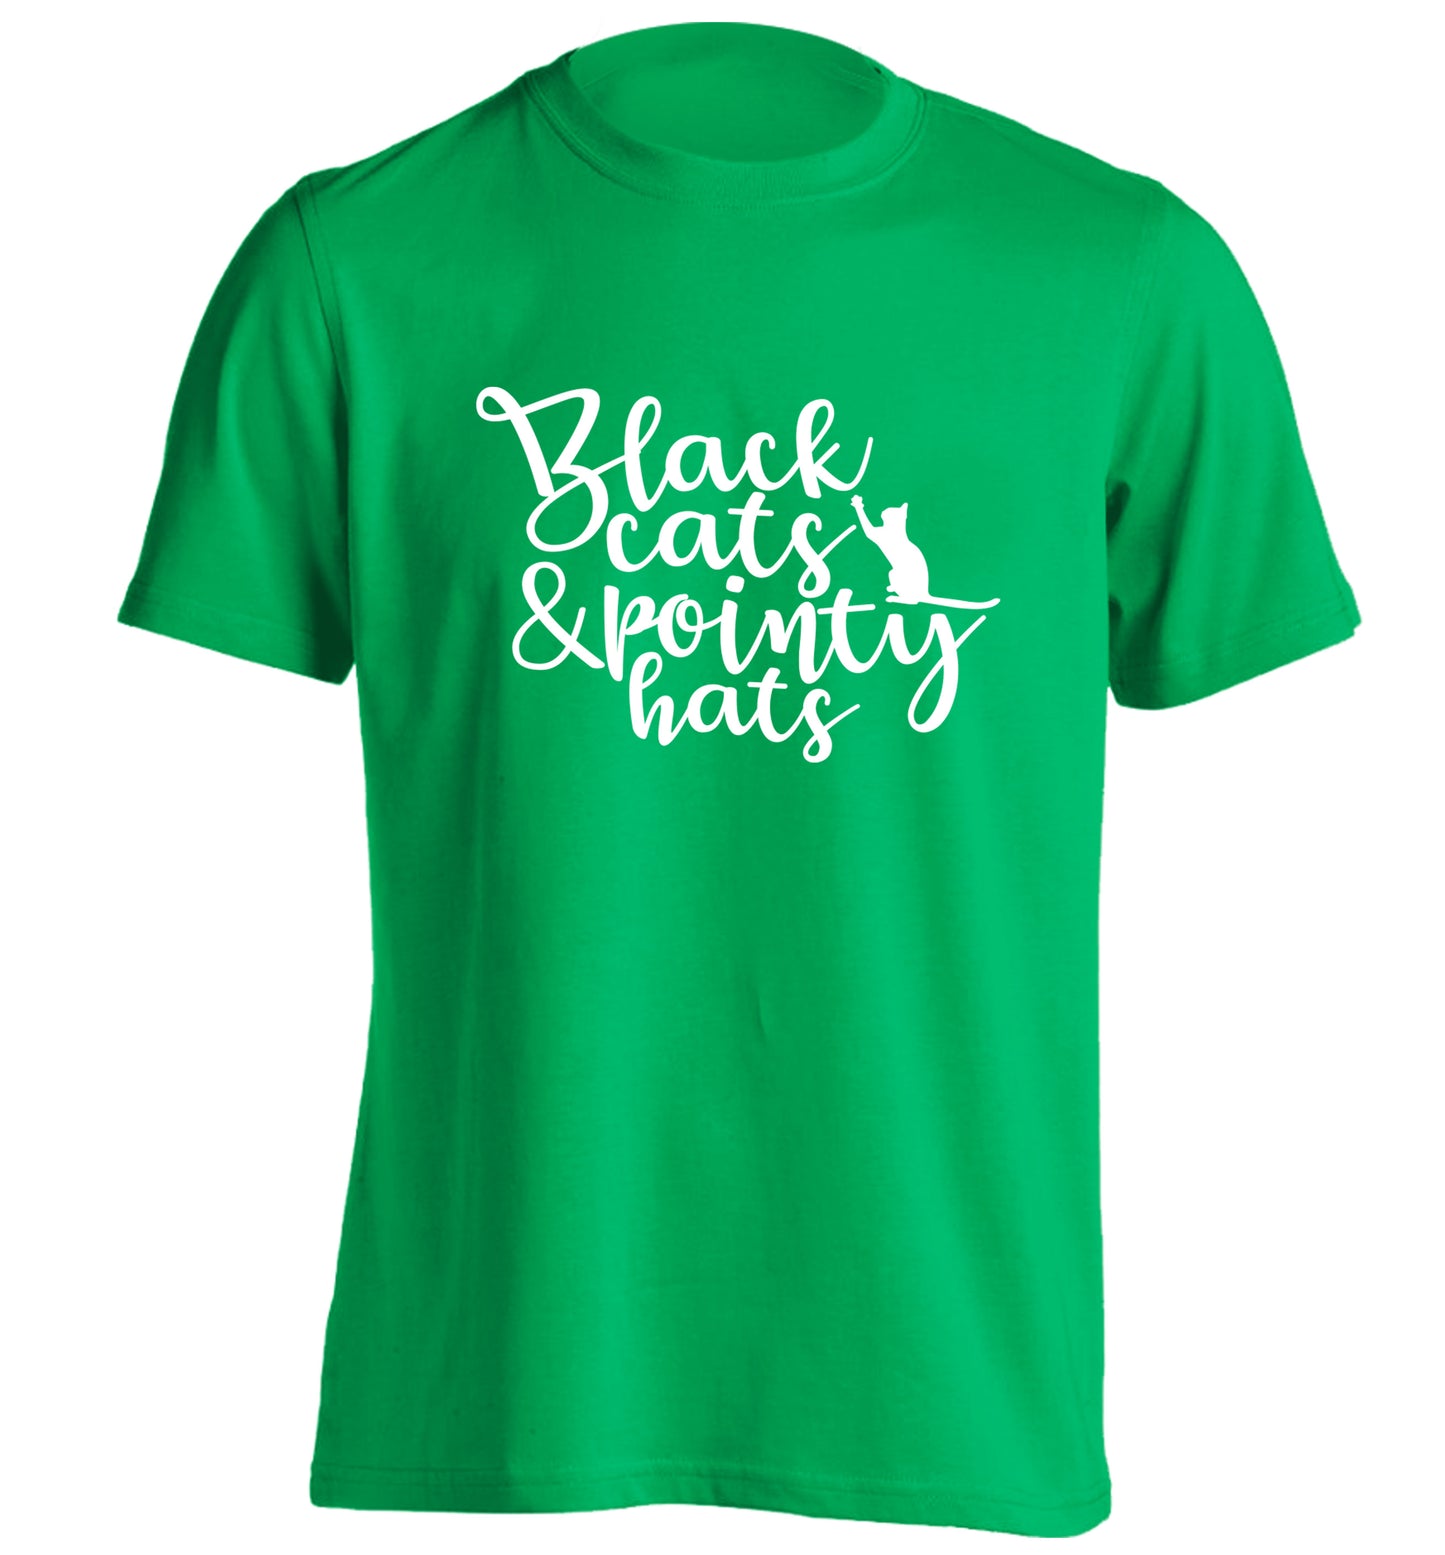 Black cats and pointy hats adults unisex green Tshirt 2XL